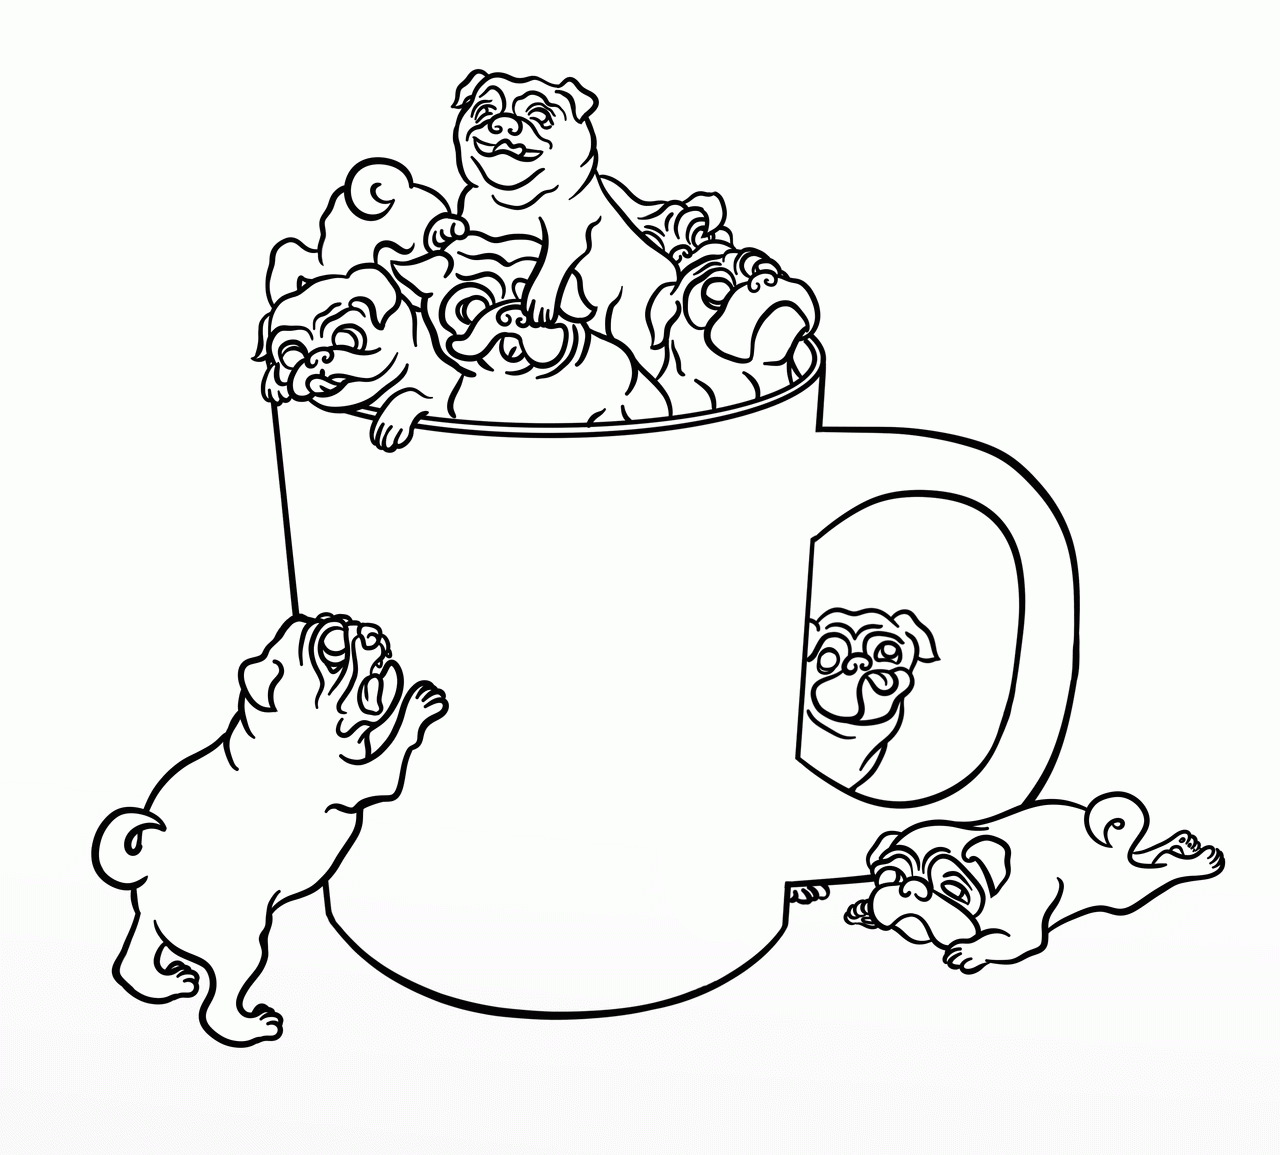 Baby Pug Coloring Pages Printable - Coloring Pages For All Ages